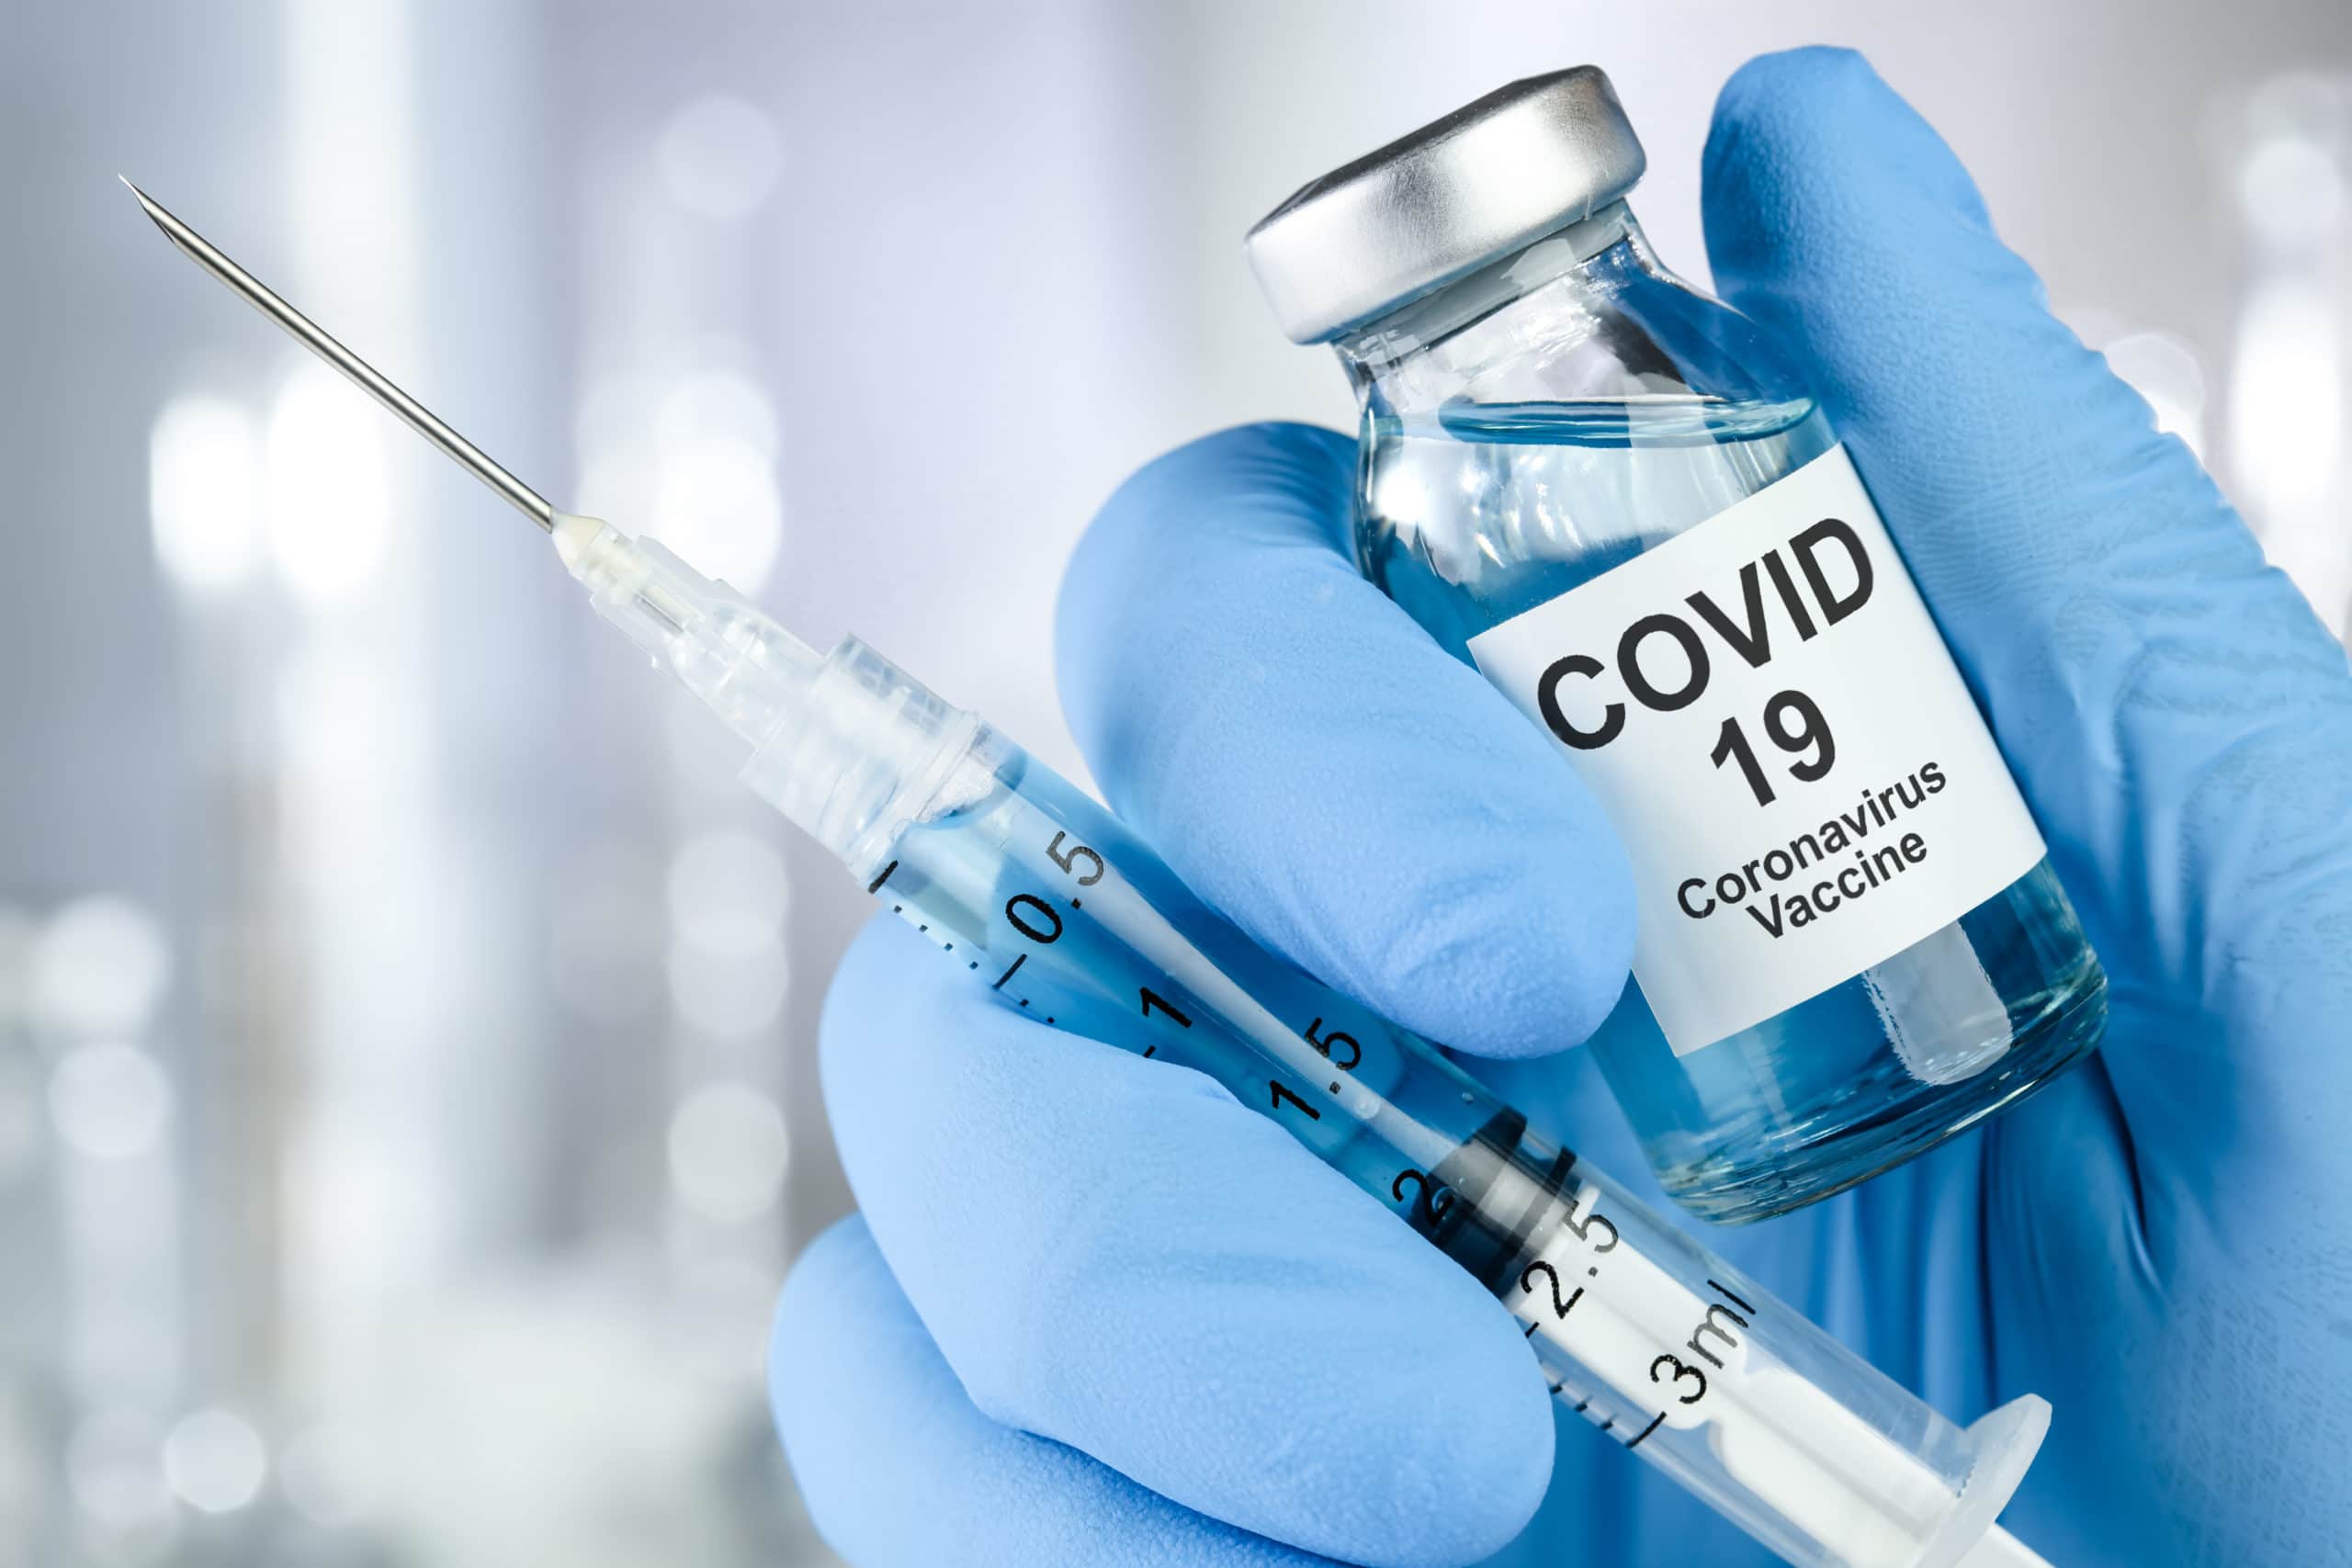 Healthcare with blue medical glove holding Covid 19 virus, vaccine vial